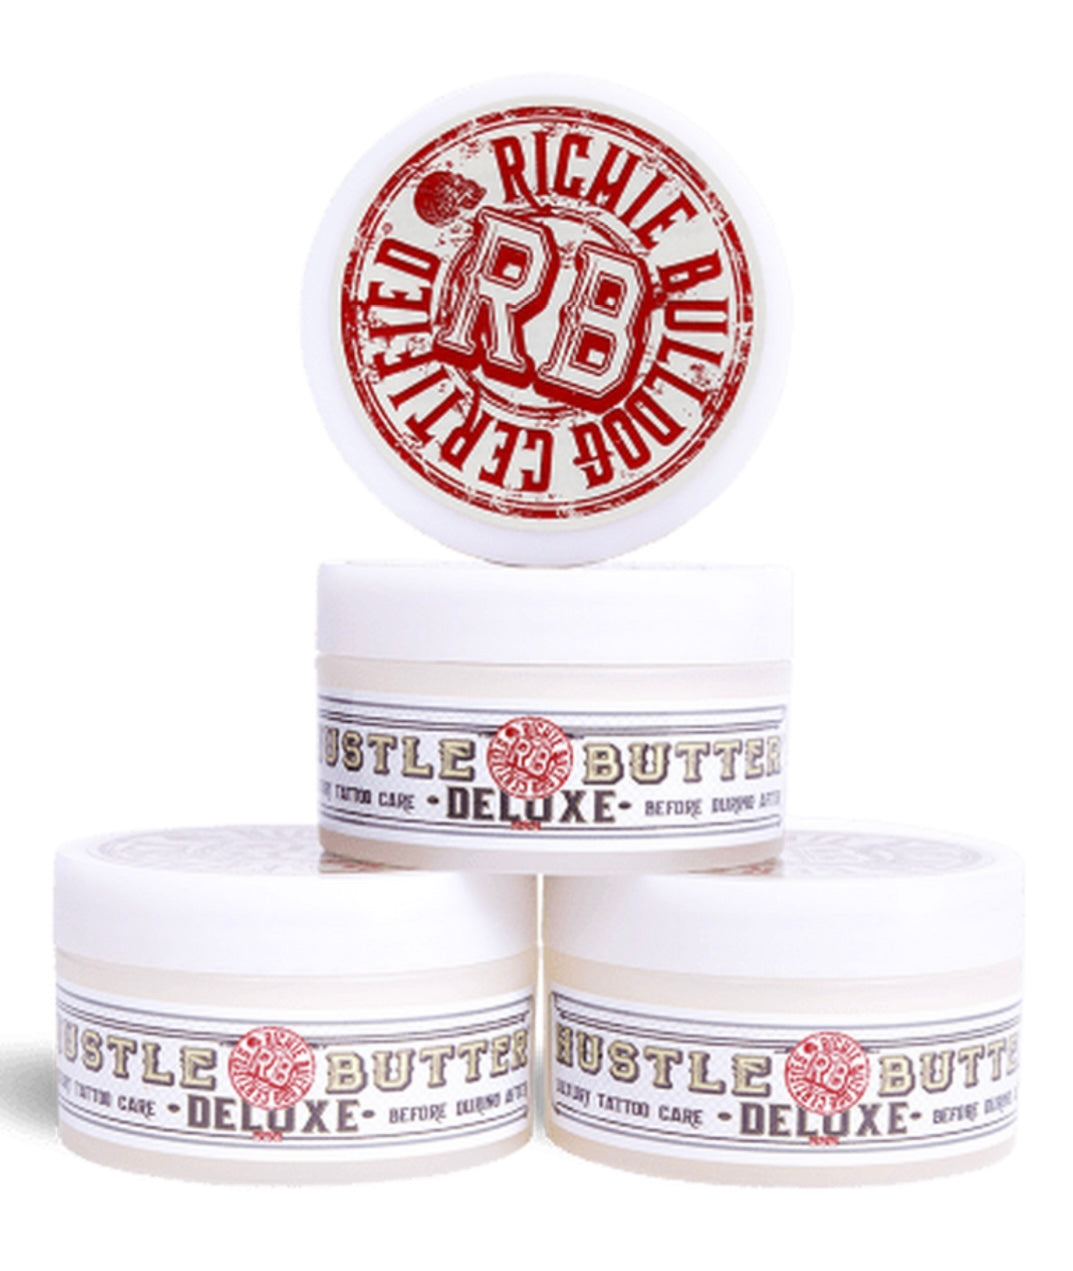 Hustle Butter Deluxe Tattoo Aftercare 5 oz